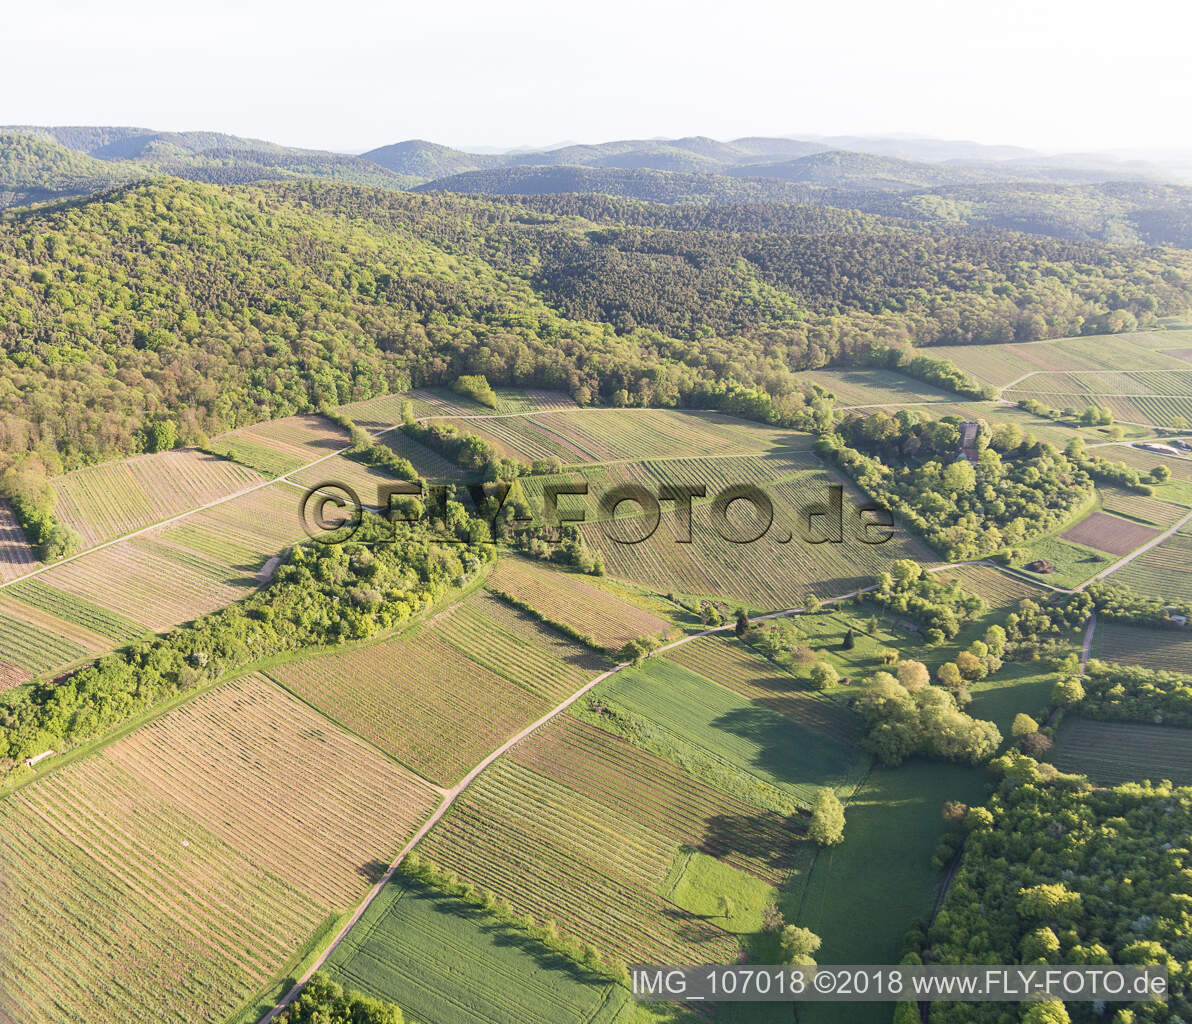 Sonnenberg vineyard in Wissembourg in the state Bas-Rhin, France seen from above